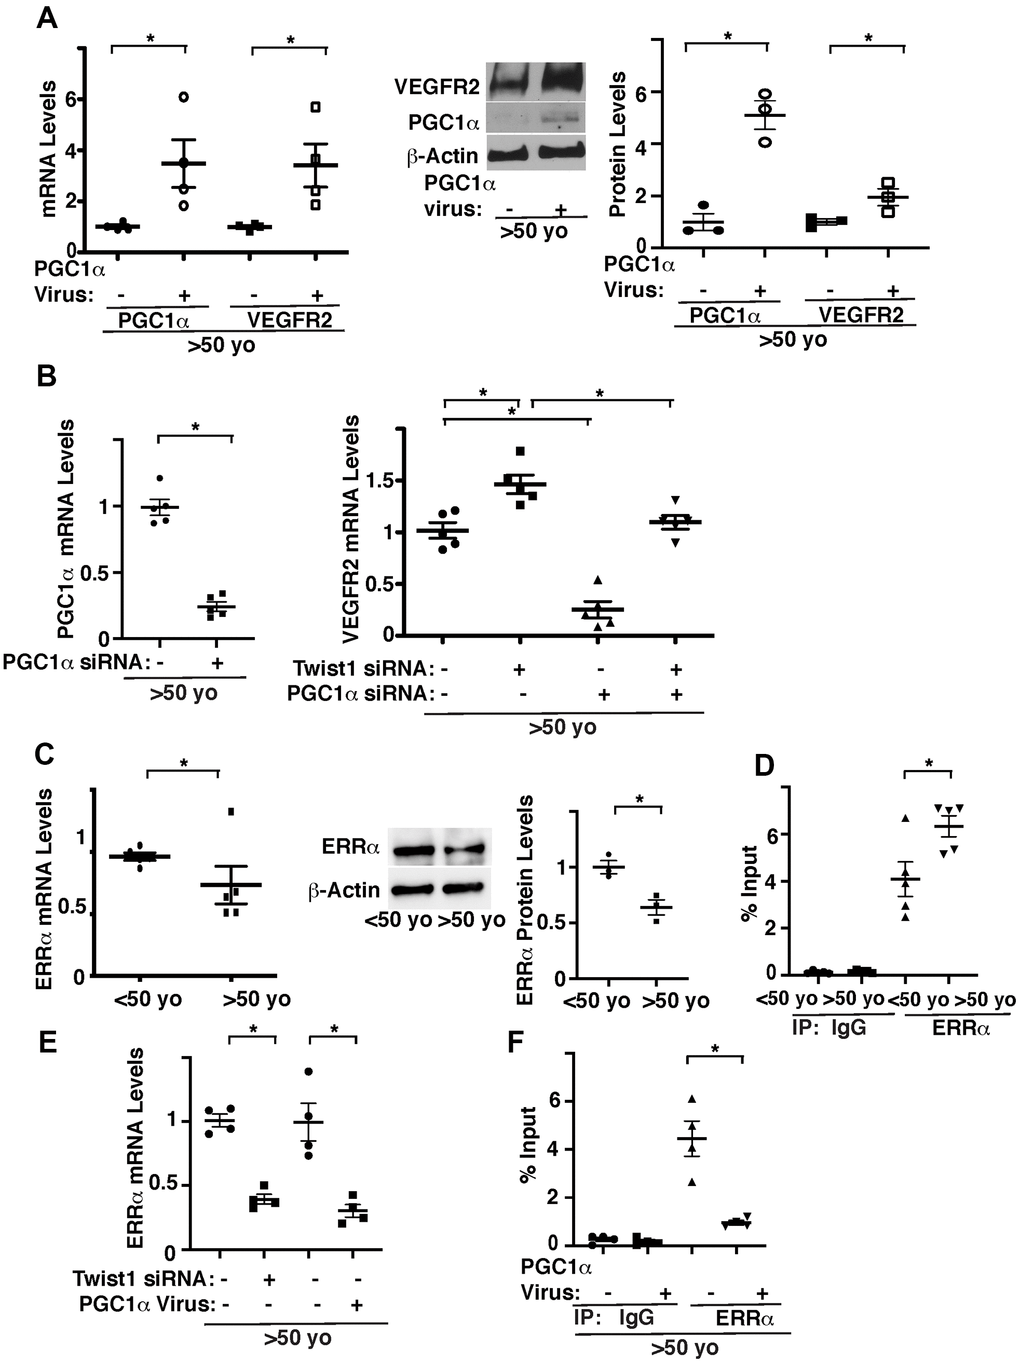 Twist1 controls age-dependent decline in VEGFR2 expression through PGC1α. (A) Graph showing the mRNA levels of PGC1α and VEGFR2 in aged (>50 years old) human adipose ECs treated with lentivirus overexpressing PGC1α or control virus (vector alone) (left, n=4, mean ± s.e.m., *, pmiddle). Graph showing VEGFR2 and PGC1α protein levels normalized by β-actin protein levels in aged human adipose ECs treated with lentivirus overexpressing PGC1α or control virus (right, n=3, mean ± s.e.m., *, pB) Graph showing the mRNA levels of PGC1α in aged human adipose ECs treated with PGC1α siRNA or control siRNA with irrelevant sequences (left, n=5, mean ± s.e.m., *, pright, n=5, mean ± s.e.m., *, pC) Graph showing the mRNA levels of ERRα in young vs. aged human adipose ECs (left, n=5, mean ± s.e.m., *, pmiddle). Graph showing ERRα protein levels normalized by β-actin protein levels in young vs. aged human adipose ECs (right, n=3, mean ± s.e.m., *, pD) ChIP analysis showing the immunoprecipitation levels of VEGFR2 promoter coimmunoprecipitating with control IgG or ERRα antibody in human adipose ECs isolated from young (50 years old) adipose tissues (n=5, mean ± s.e.m., *, pE) Graph showing the mRNA levels of ERRα in aged human adipose ECs treated with Twist1 siRNA or PGC1α virus (n=4, mean ± s.e.m., *, pF) ChIP analysis showing the immunoprecipitation levels of VEGFR2 promoter coimmunoprecipitating with control IgG or ERRα antibody in human adipose ECs isolated from old (>50 years old) adipose tissues treated with PGC1α virus or control virus (n=4, mean ± s.e.m., *, p